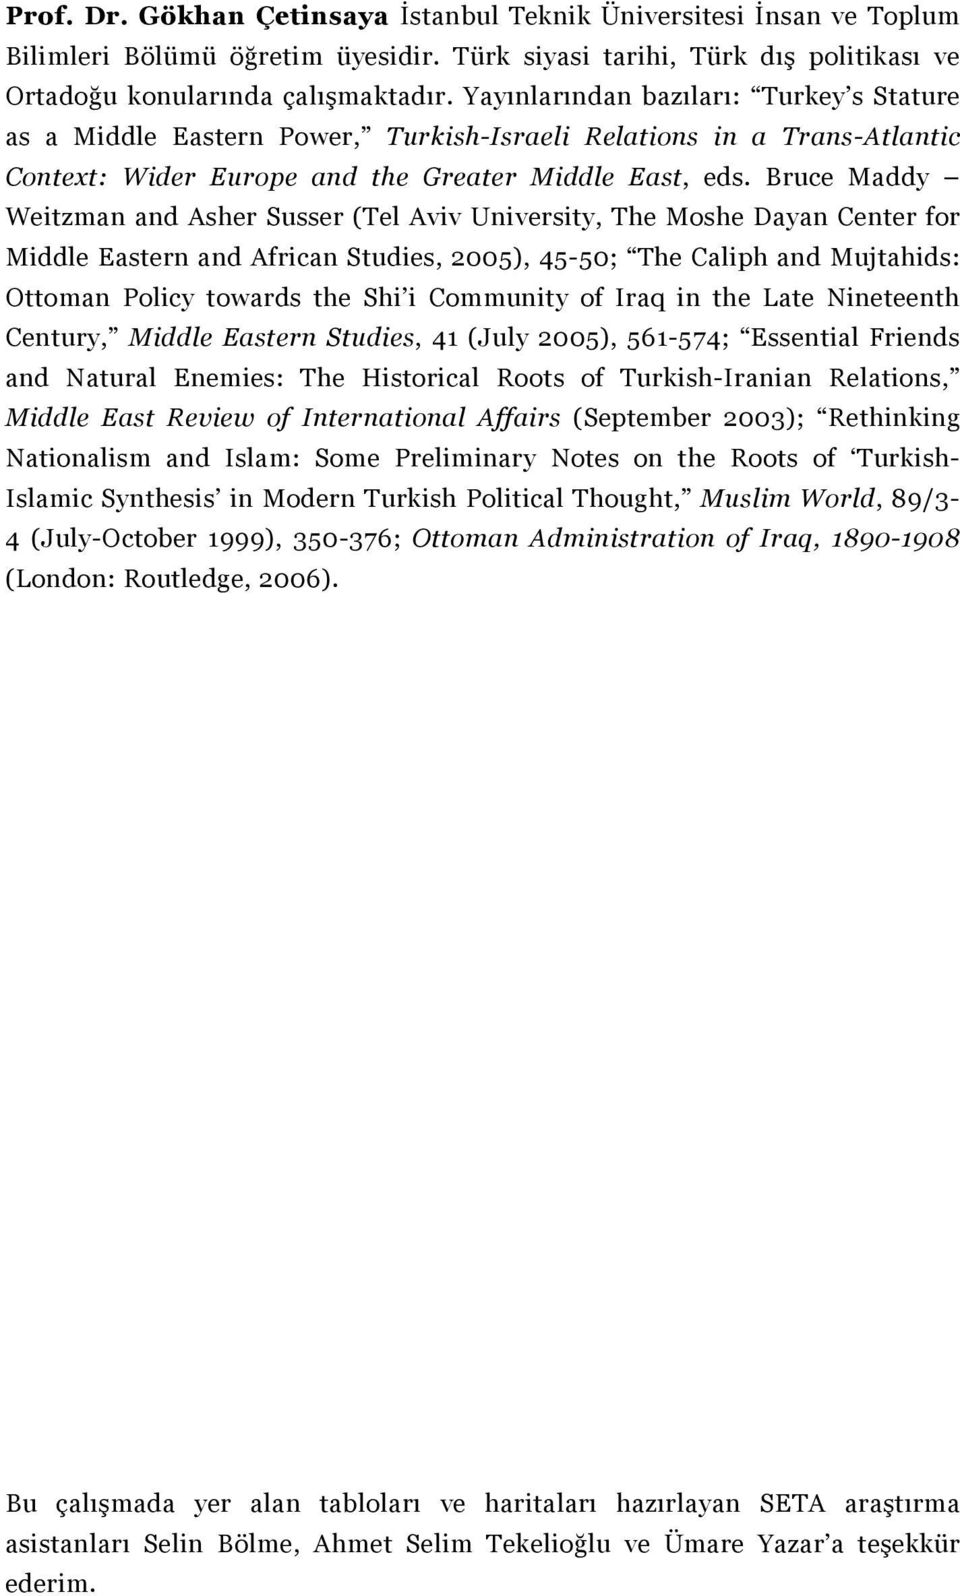 Bruce Maddy Weitzman and Asher Susser (Tel Aviv University, The Moshe Dayan Center for Middle Eastern and African Studies, 2005), 45-50; The Caliph and Mujtahids: Ottoman Policy towards the Shi i